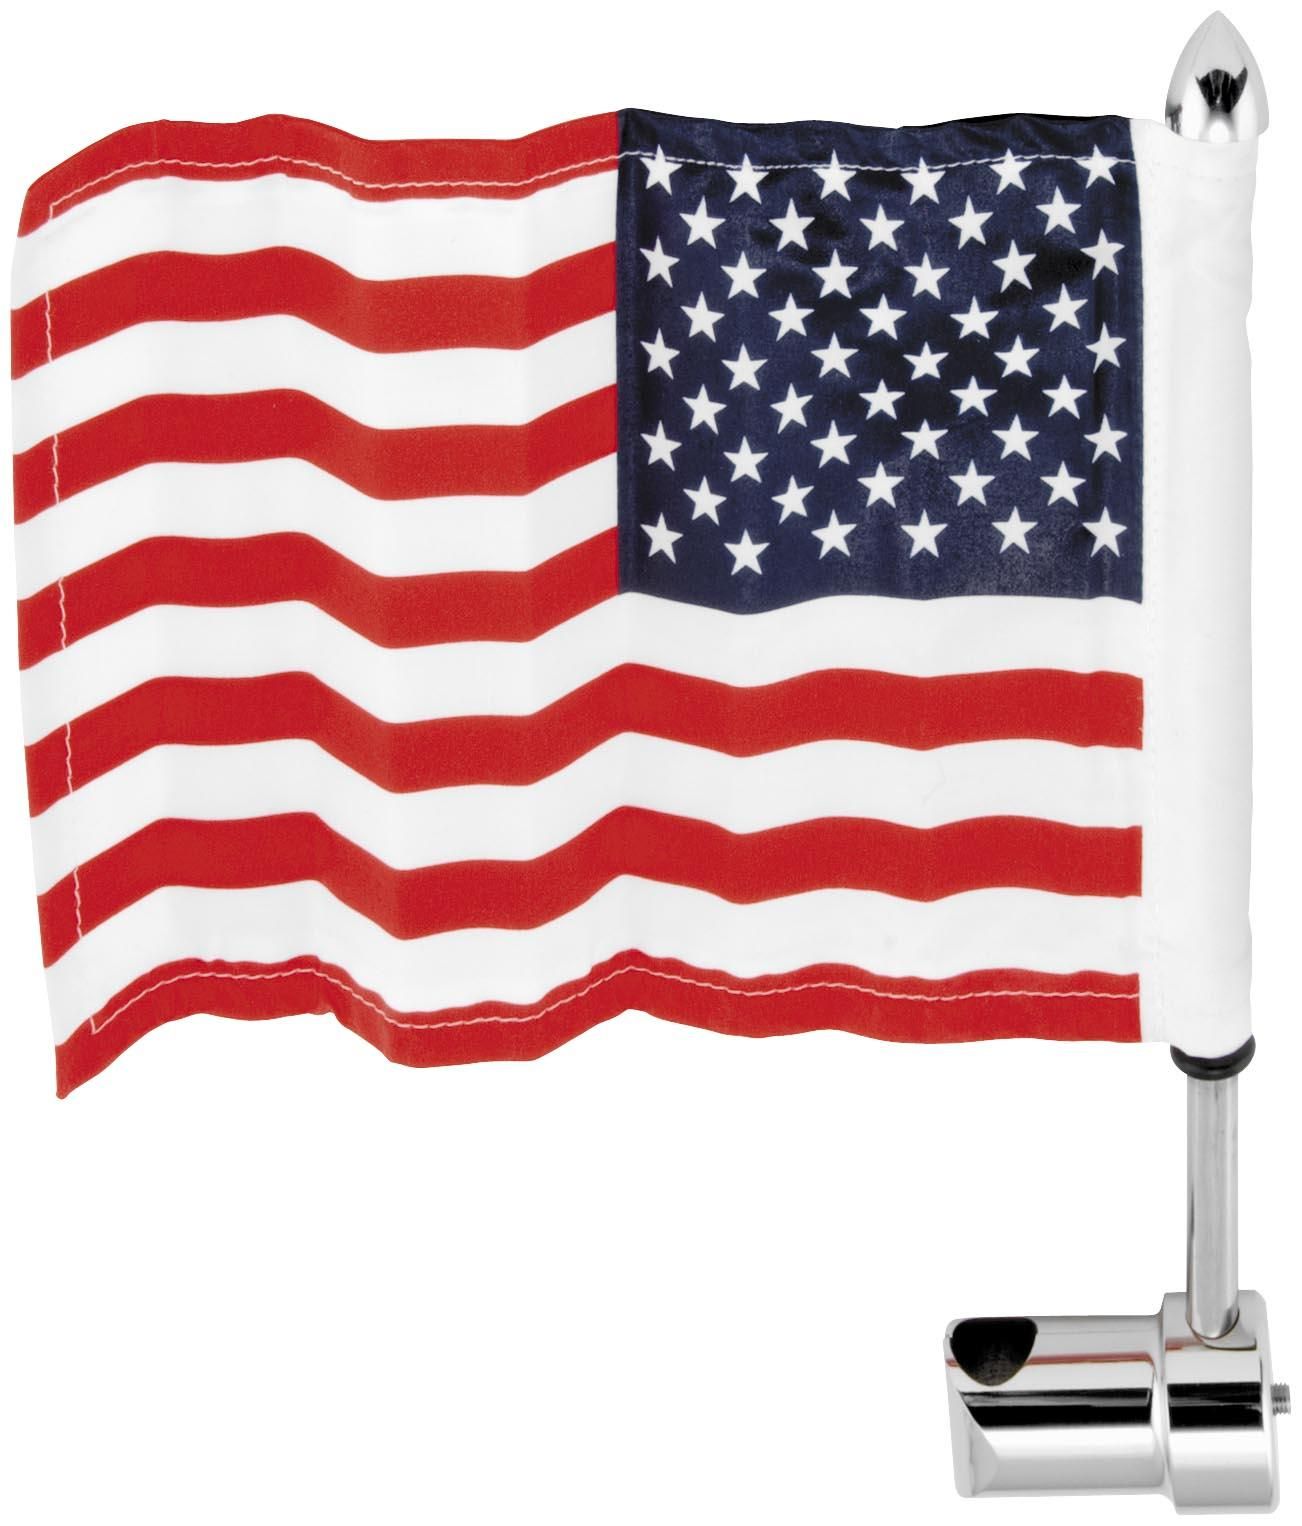 3RM3-PRO-PAD-MSQSB-25 Sissy Bar Metric Mount (.25in.) With 6in. x 9in. USA Flag